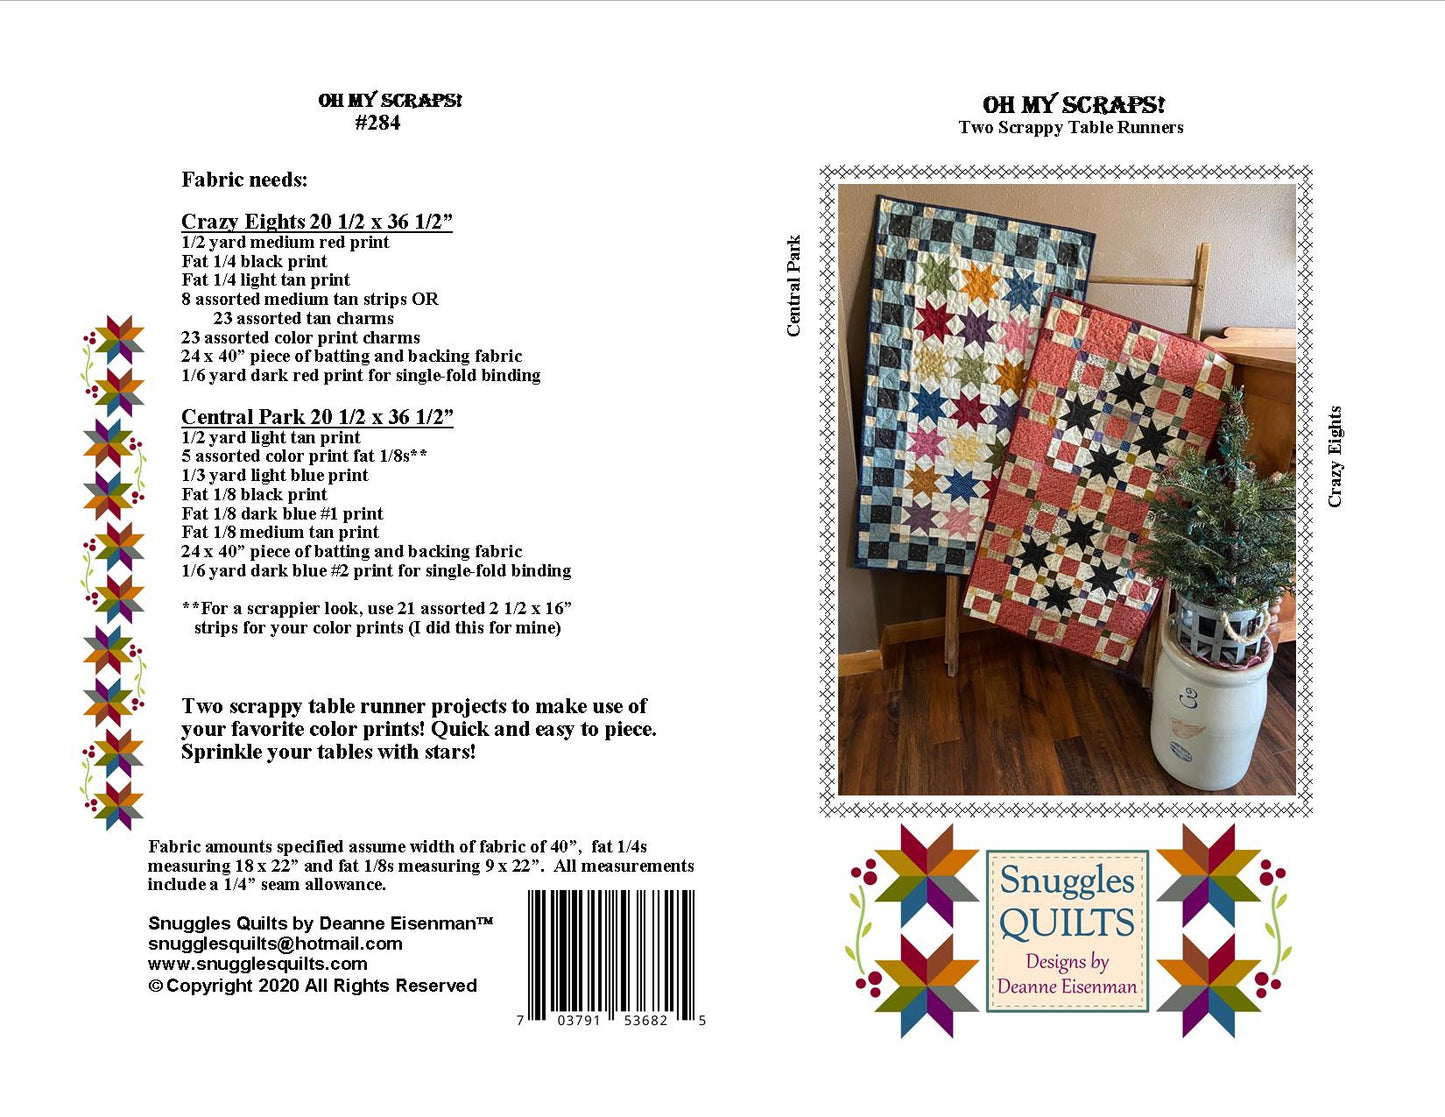 Scrappy table runner quilt patterns designed by Deanne Eisenman for Snuggles Quilts